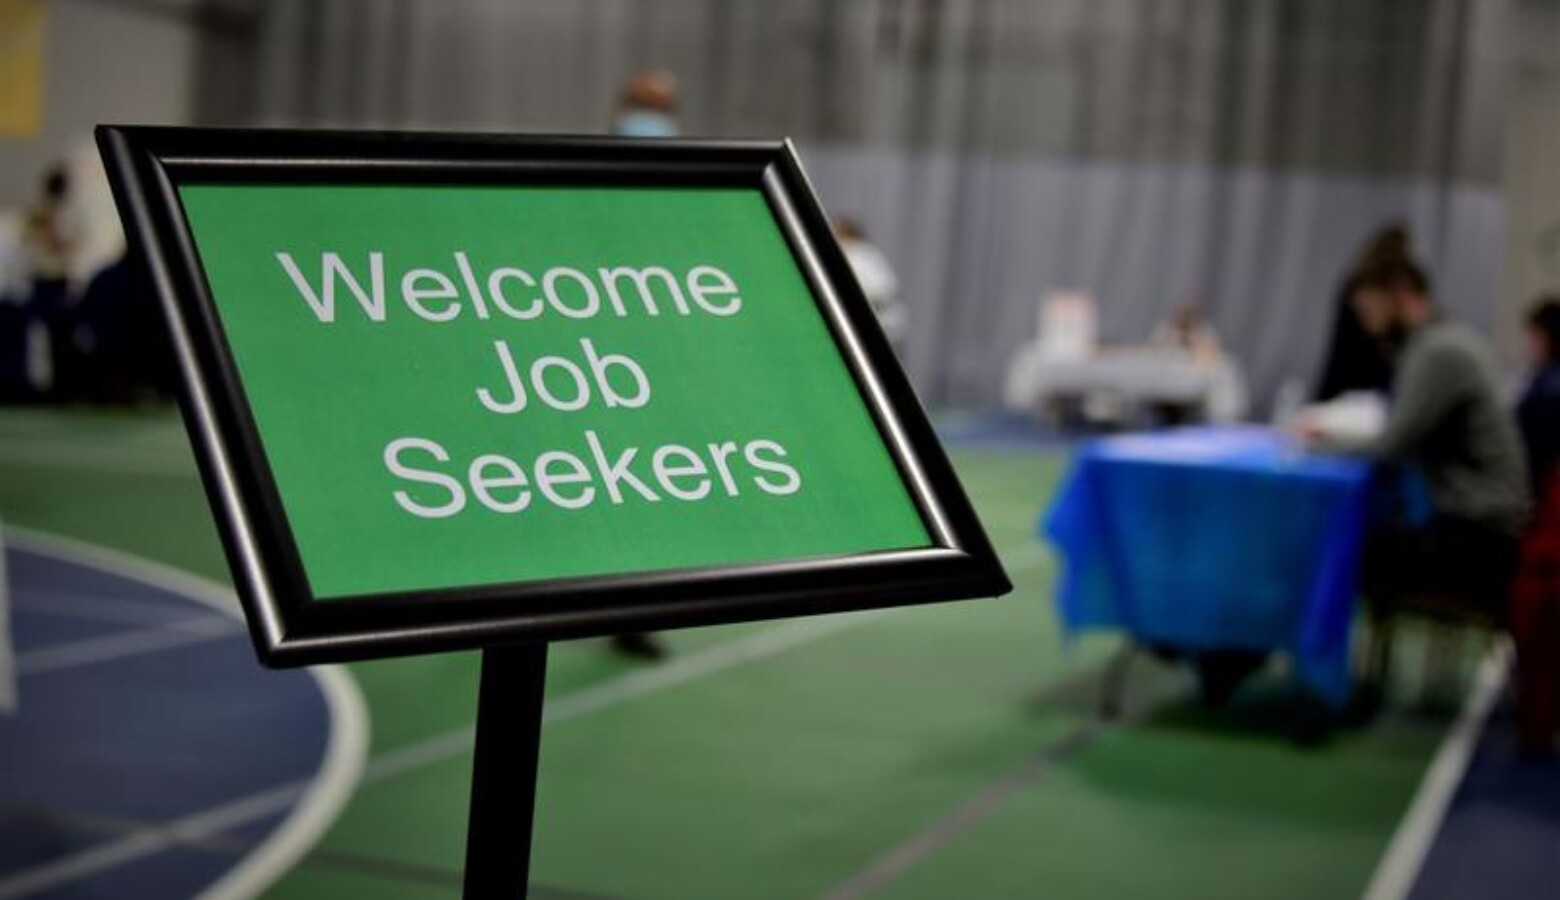 A sign welcomes job seekers to the "Second Chances Job Fair" in South Bend. (Justin Hicks/IPB News)